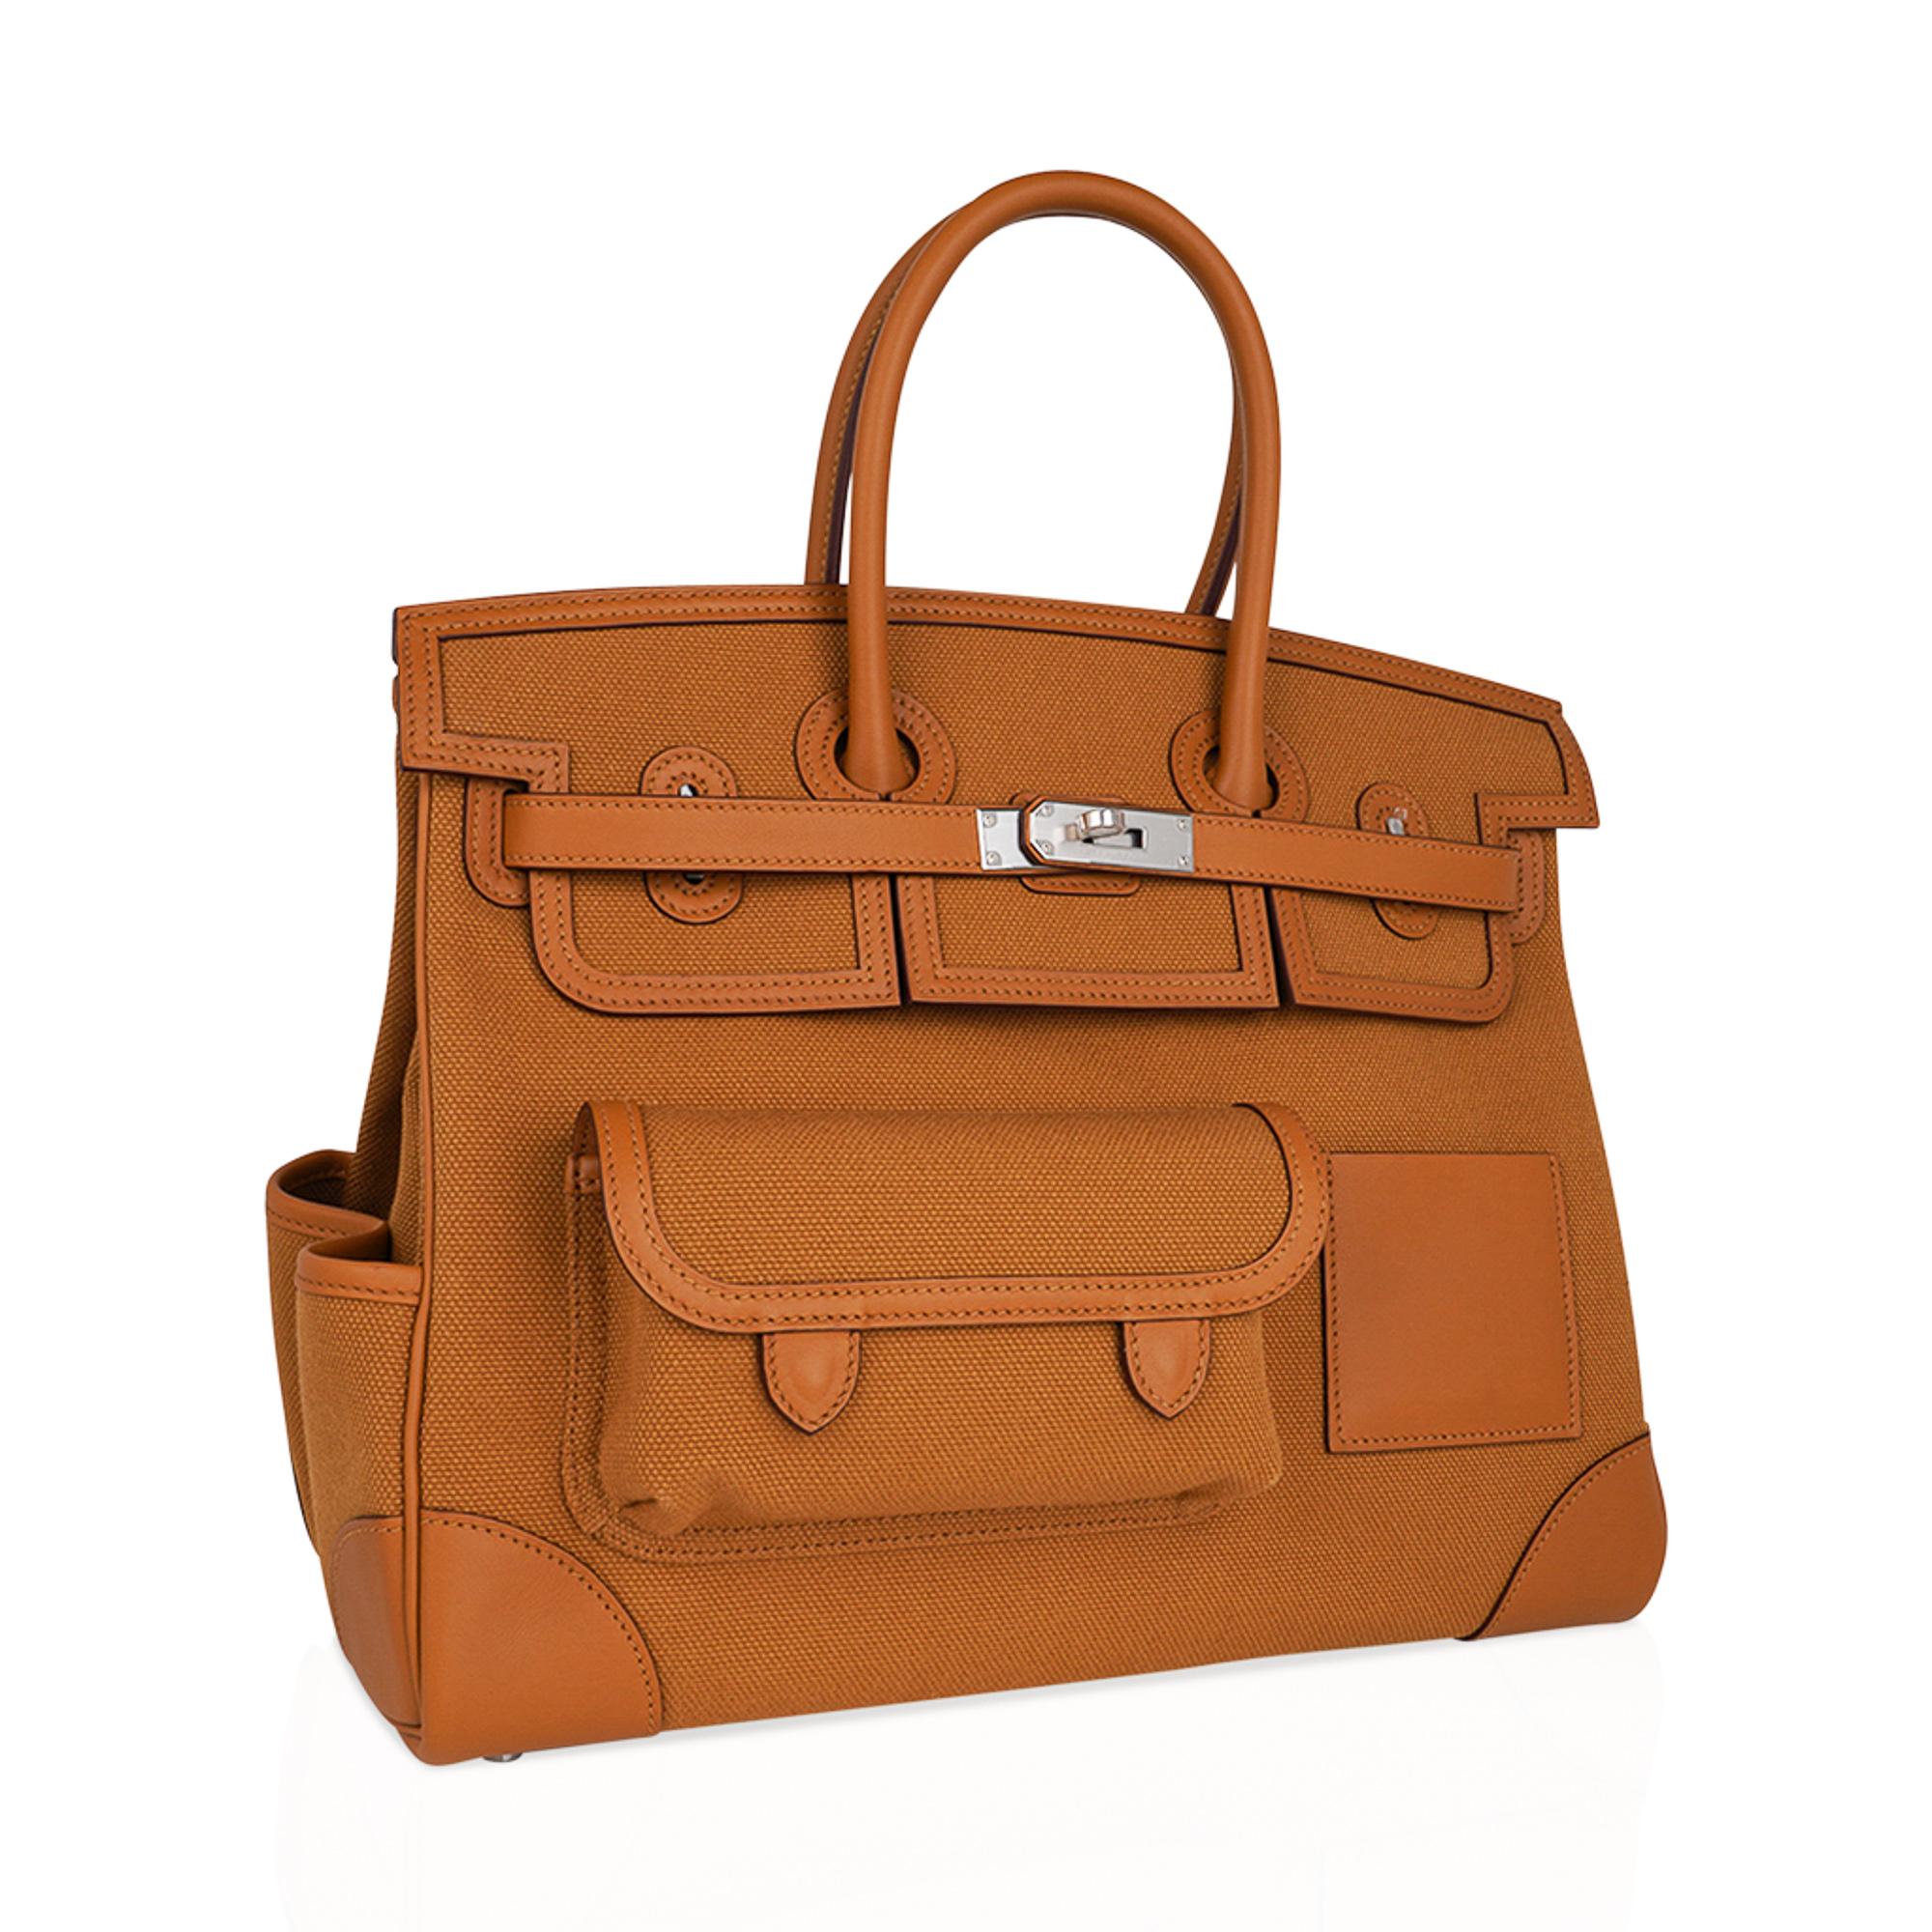 Mightychic offers an Hermes Cargo Birkin 35 bag featured in golden Sesame.
This Hermes limited edition utility Birkin bag is created with Goeland canvas and Swift leather trim.
Includes front and rear snap pockets, exterior credit card holder, a